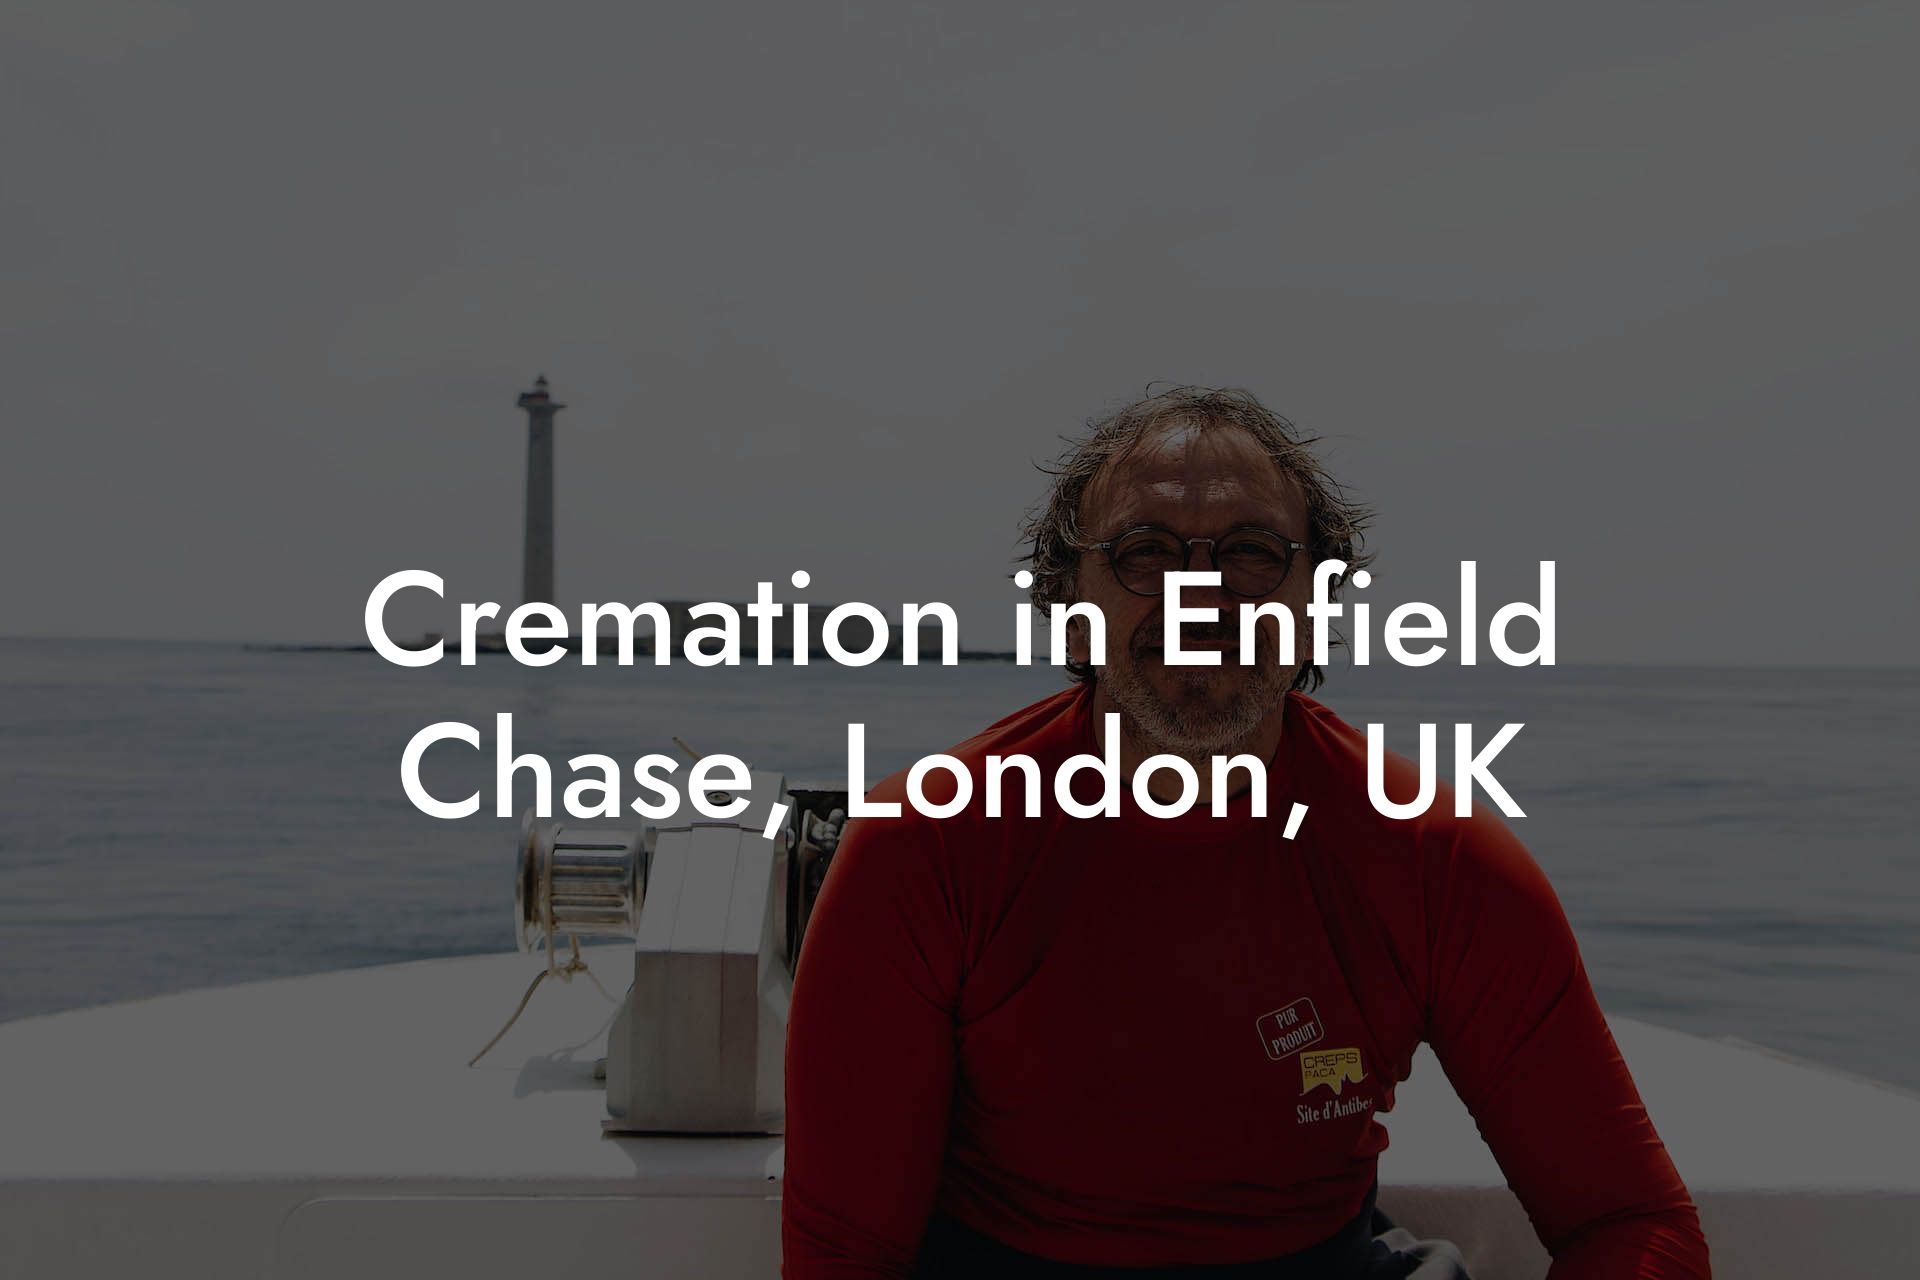 Cremation in Enfield Chase, London, UK